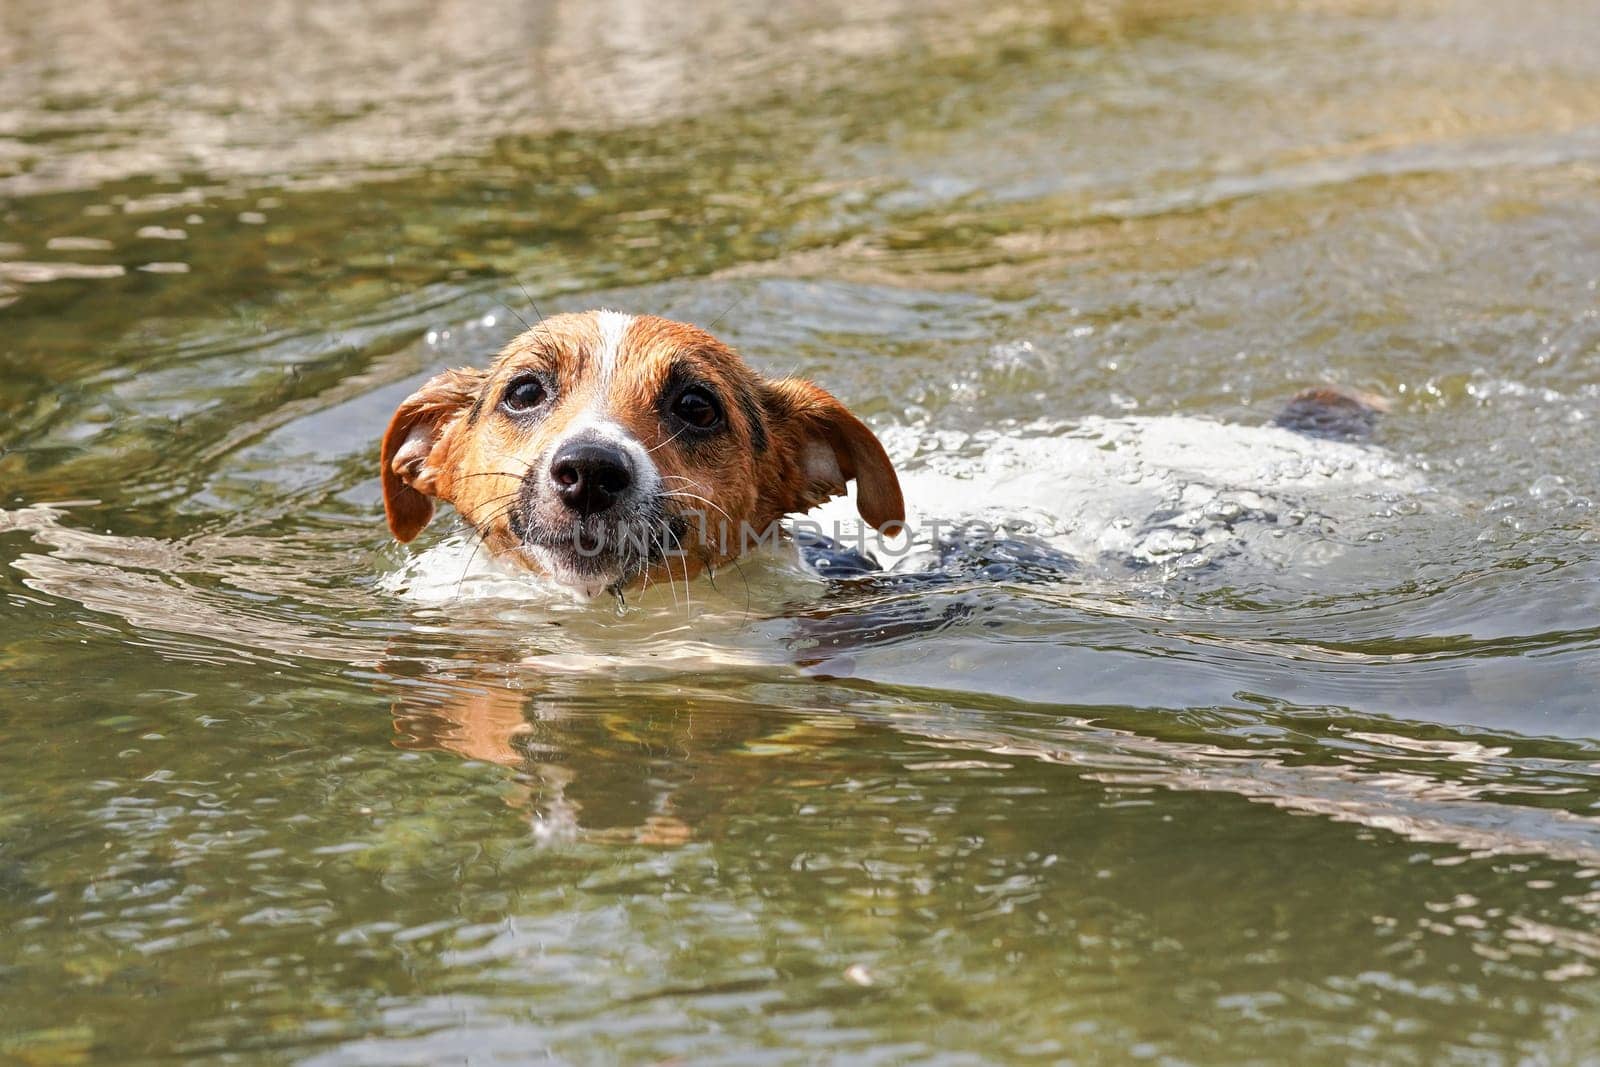 Jack Russell terrier swimming in water on sunny day, closeup on her head visible above water by Ivanko